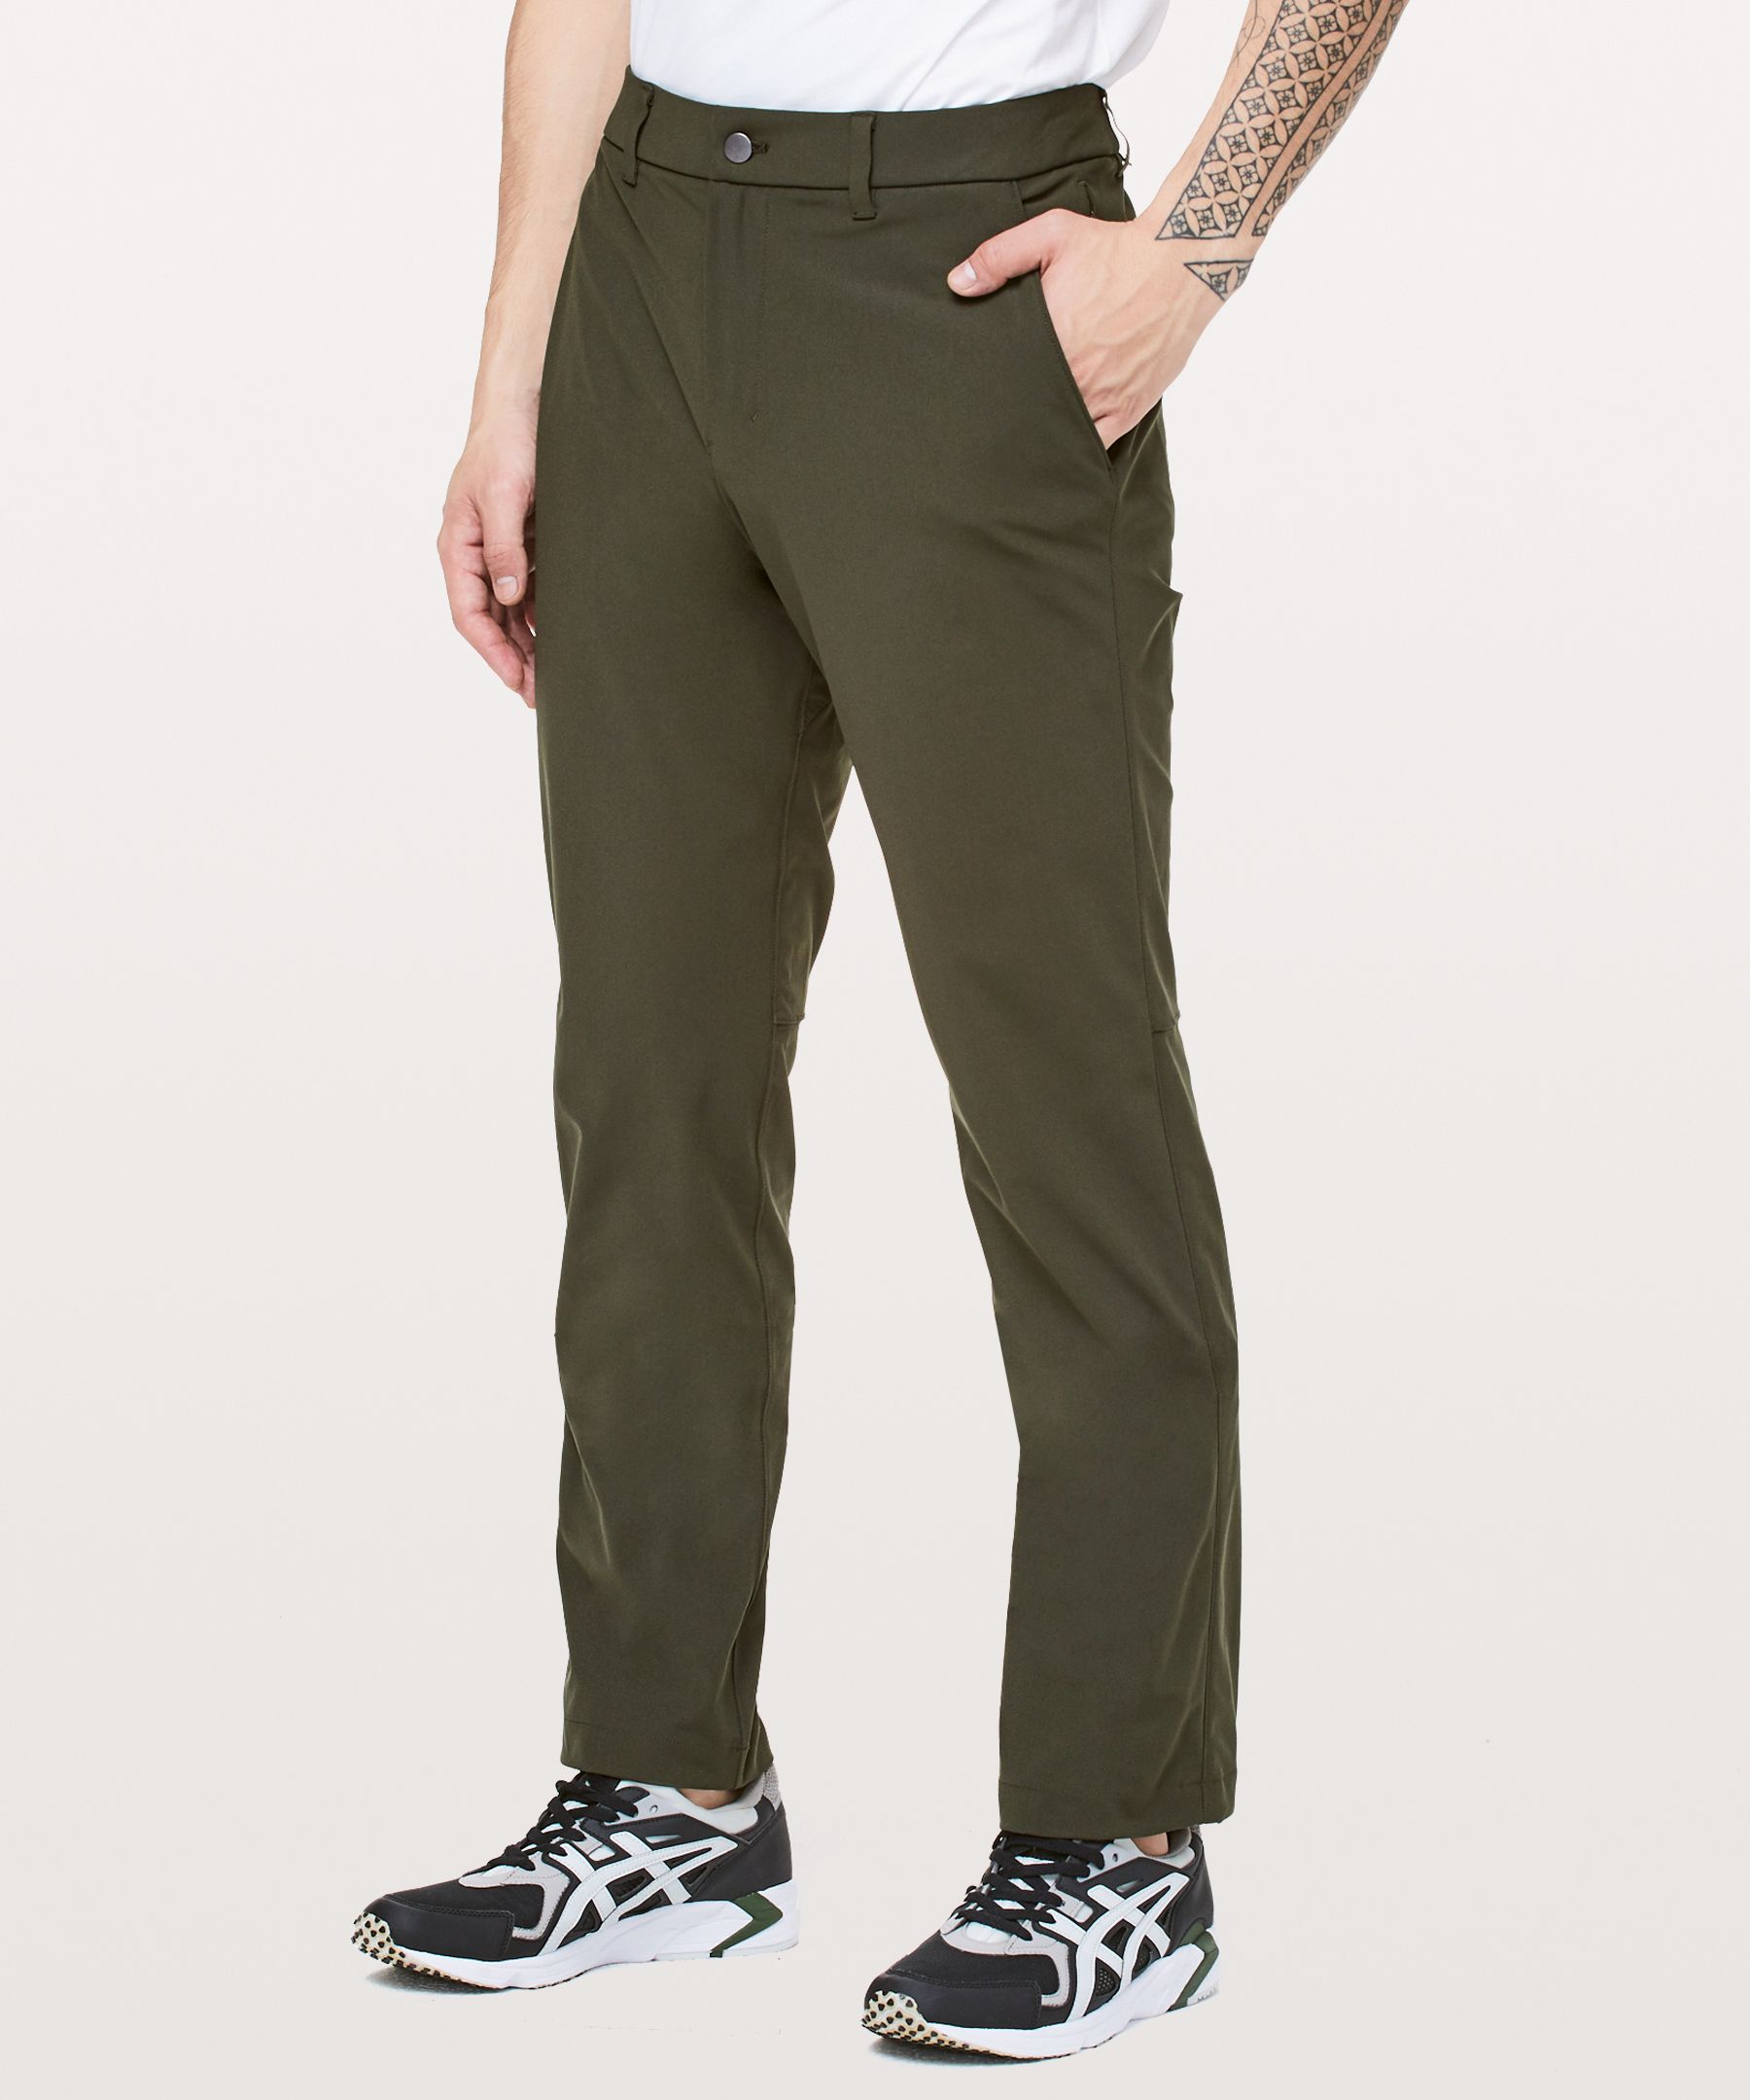 Lululemon Commission Pant Relaxed *online Only Warpstreme 34" In Dark Olive